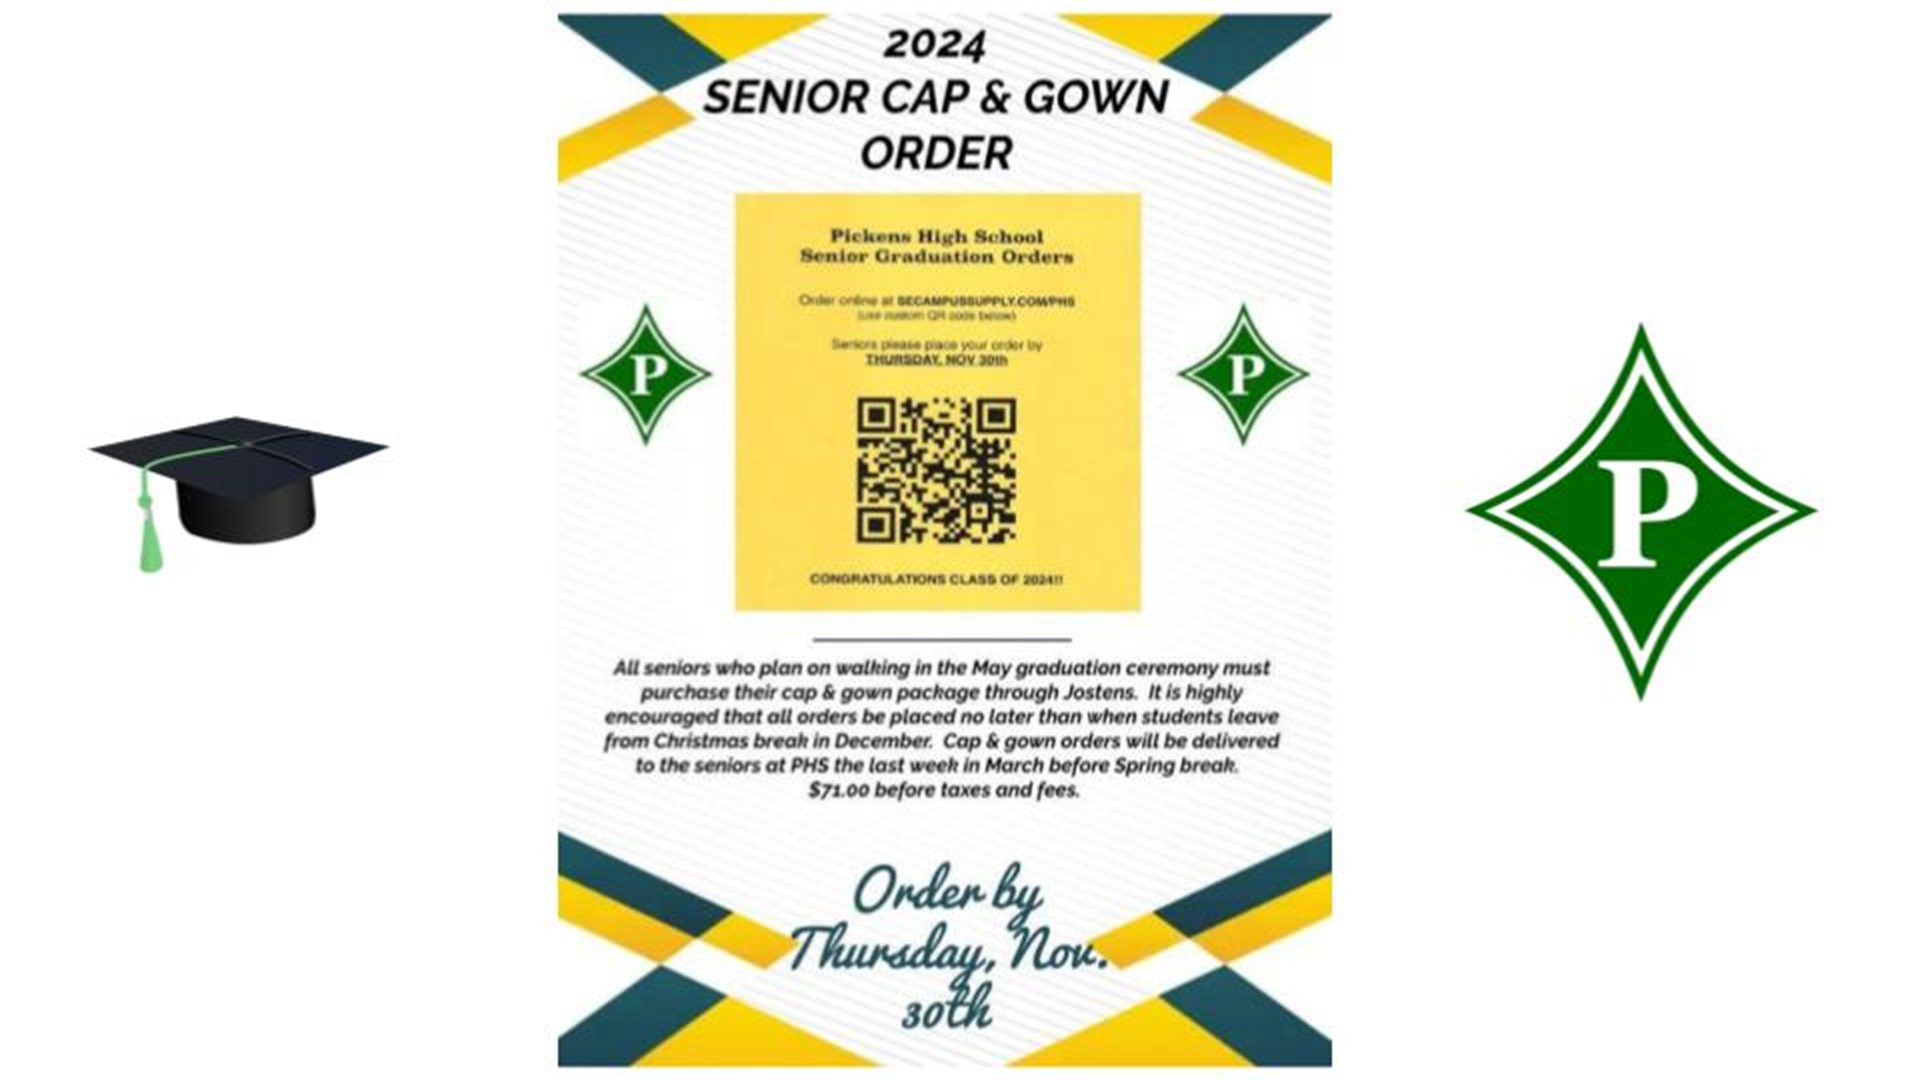 SENIOR CAP AND GOWN ORDERS